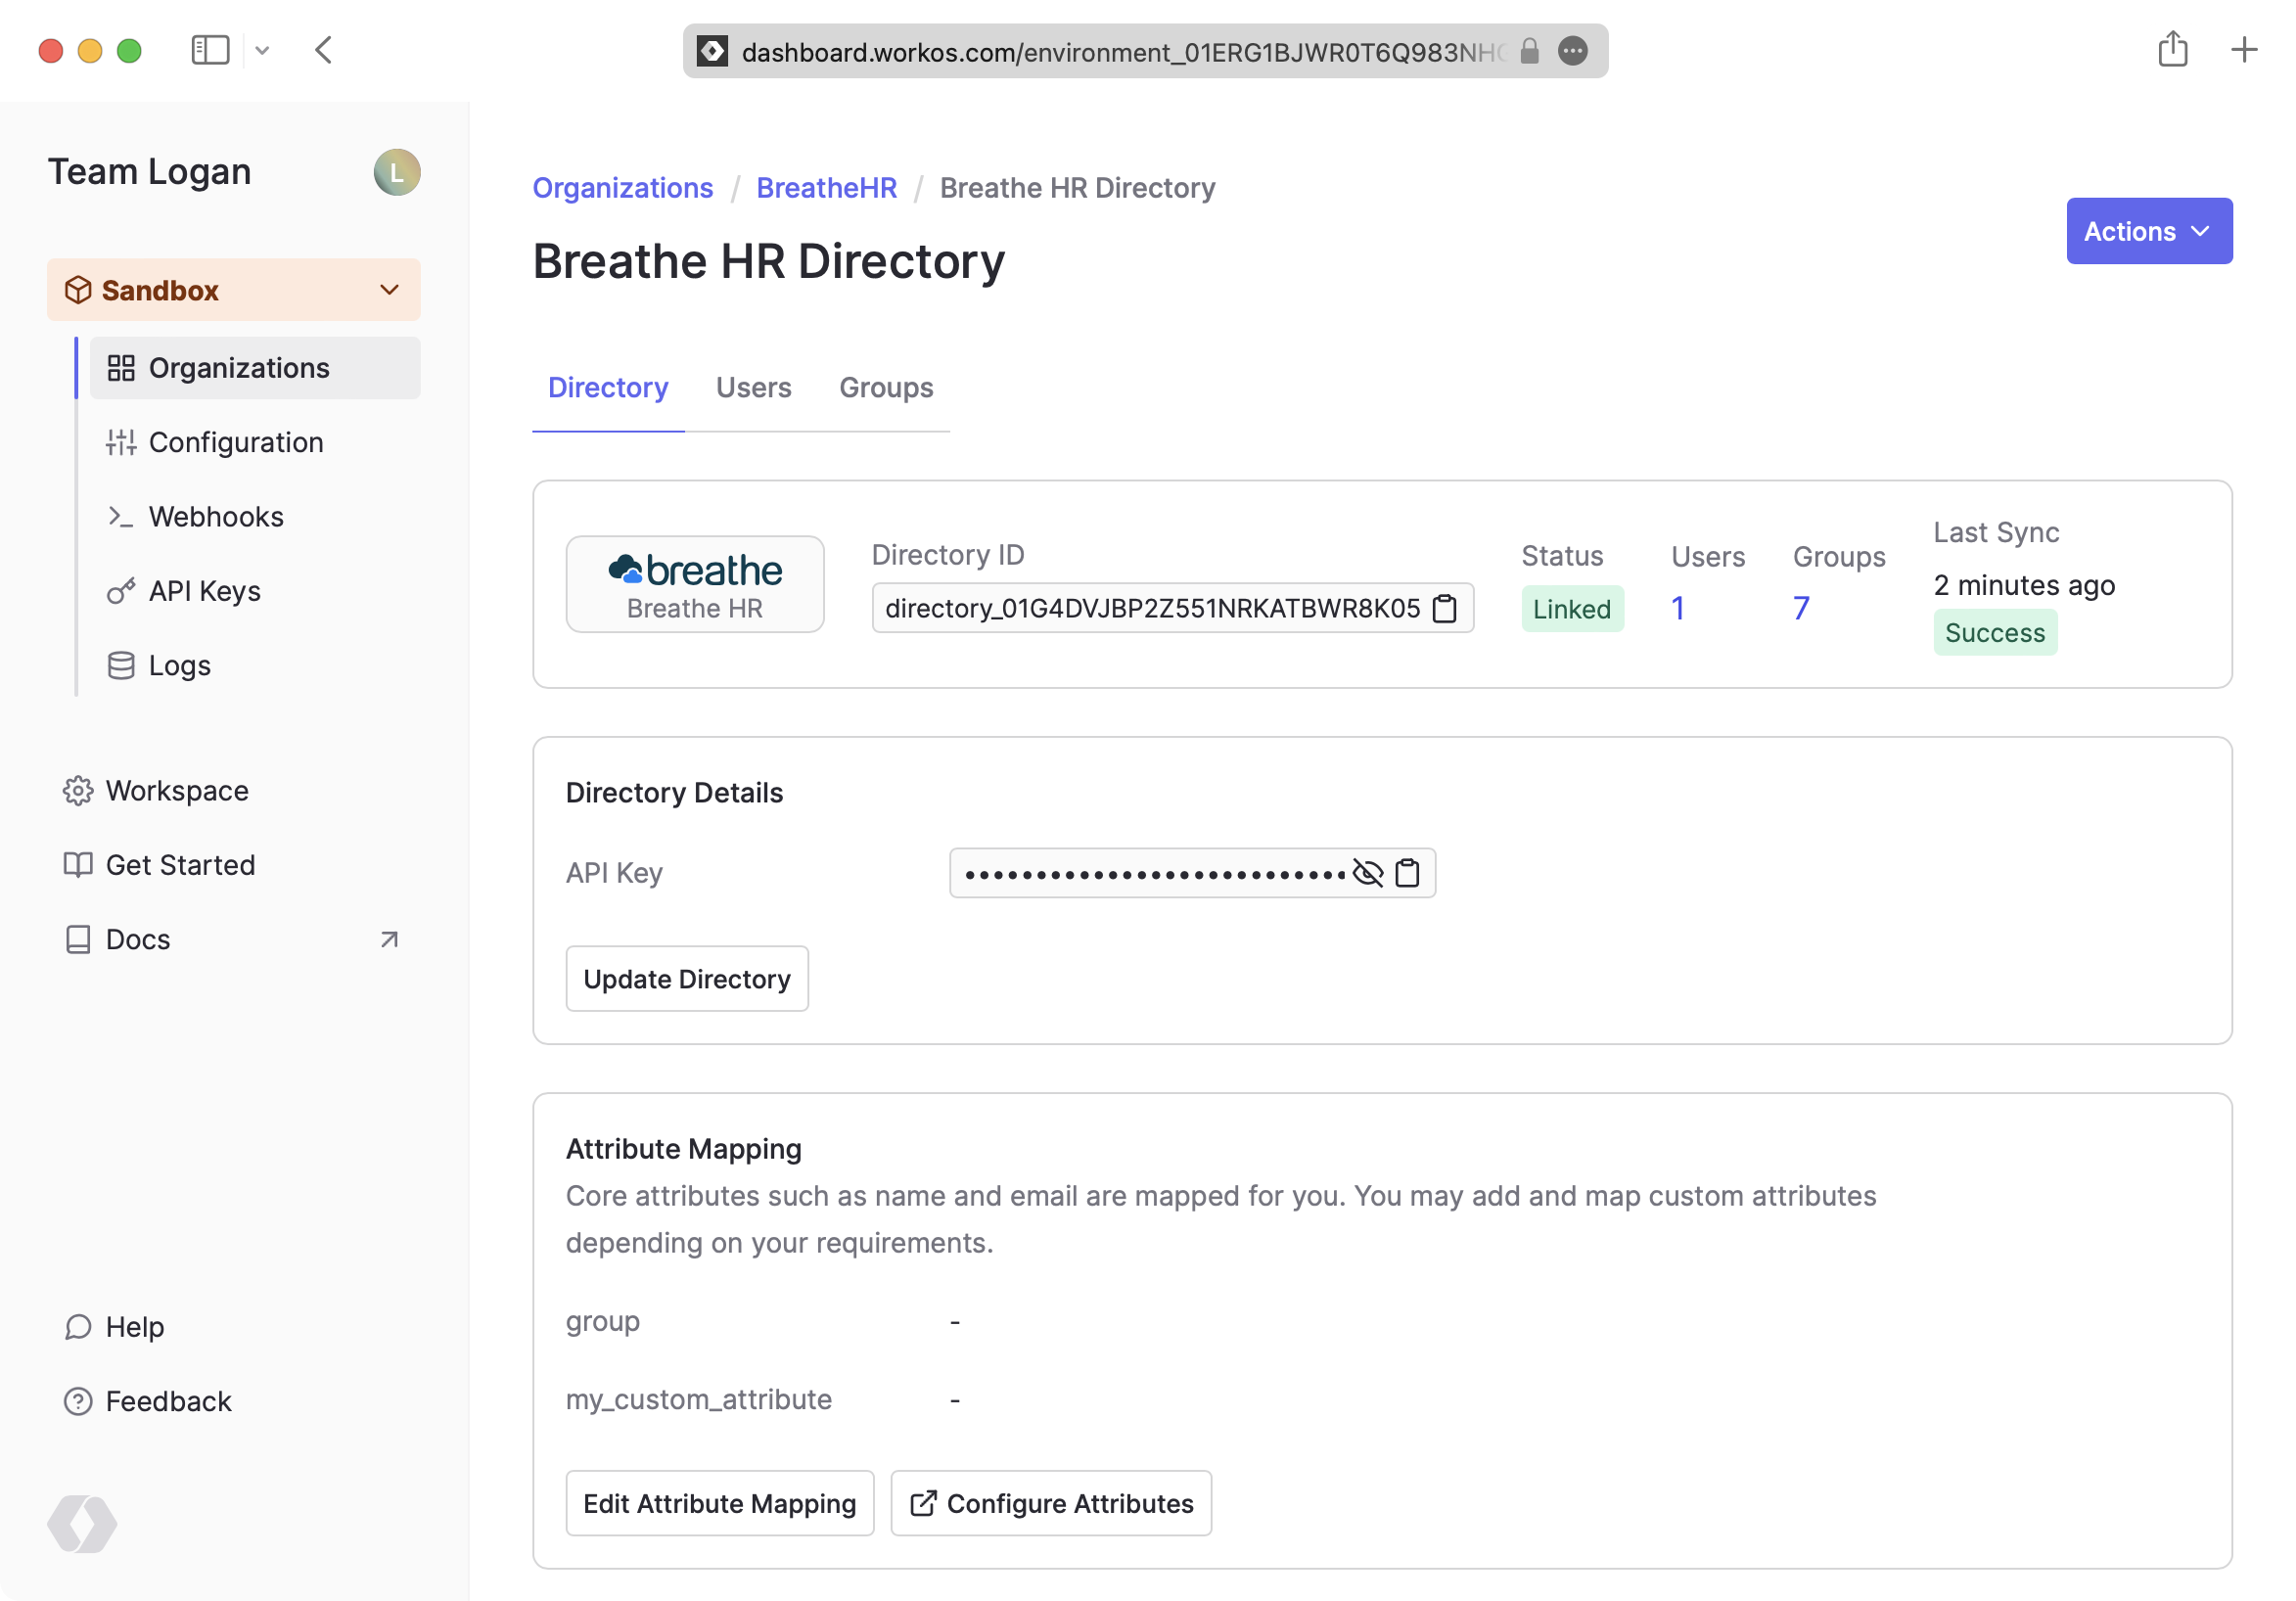 A screenshot showing a successfully linked Breathe HR Directory in the WorkOS dashboard.